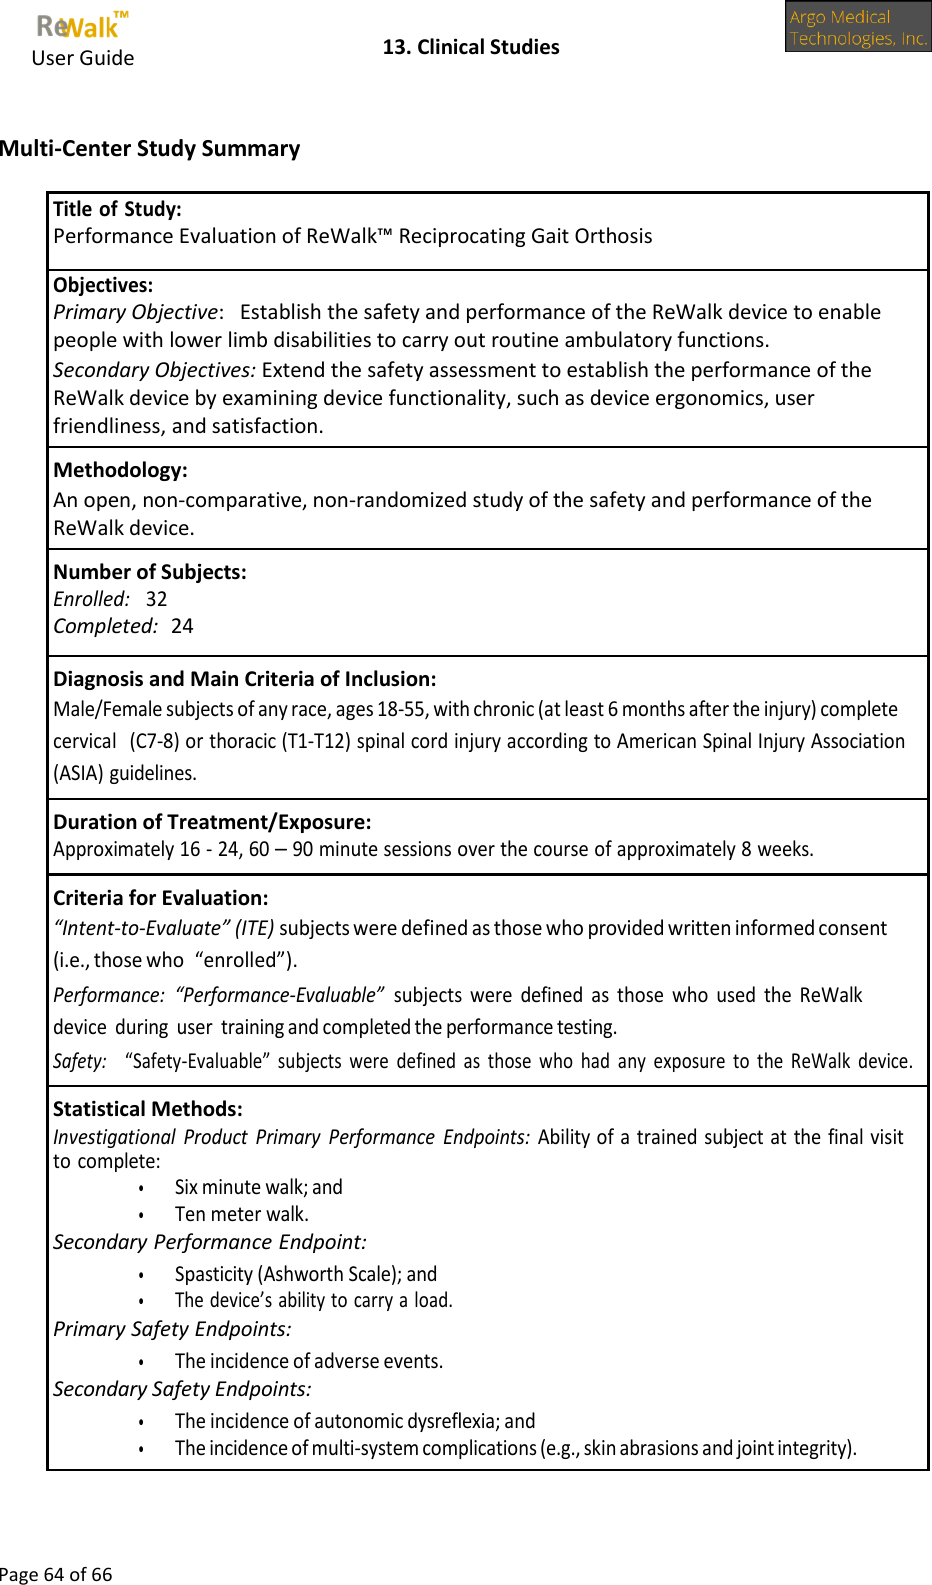     User Guide    13. Clinical Studies  Page 64 of 66   Multi-Center Study Summary   Title of Study: Performance Evaluation of ReWalk™ Reciprocating Gait Orthosis Objectives: Primary Objective:   Establish the safety and performance of the ReWalk device to enable people with lower limb disabilities to carry out routine ambulatory functions. Secondary Objectives: Extend the safety assessment to establish the performance of the ReWalk device by examining device functionality, such as device ergonomics, user friendliness, and satisfaction. Methodology: An open, non-comparative, non-randomized study of the safety and performance of the ReWalk device. Number of Subjects: Enrolled:   32 Completed:  24 Diagnosis and Main Criteria of Inclusion: Male/Female subjects of any race, ages 18-55, with chronic (at least 6 months after the injury) complete cervical (C7-8) or thoracic (T1-T12) spinal cord injury according to American Spinal Injury Association (ASIA) guidelines. Duration of Treatment/Exposure: Approximately 16 - 24, 60 – 90 minute sessions over the course of approximately 8 weeks. Criteria for Evaluation: “Intent-to-Evaluate” (ITE) subjects were defined as those who provided written informed consent (i.e., those who “enrolled”). Performance:  “Performance-Evaluable”  subjects  were  defined  as  those  who  used  the  ReWalk device  during  user training and completed the performance testing. Safety:    “Safety-Evaluable”  subjects  were  defined  as  those  who  had  any  exposure  to  the  ReWalk  device. Statistical Methods: Investigational  Product  Primary  Performance  Endpoints:  Ability of a trained subject at the final visit to complete: • Six minute walk; and • Ten meter walk. Secondary Performance Endpoint: • Spasticity (Ashworth Scale); and • The device’s ability to carry a load. Primary Safety Endpoints: • The incidence of adverse events. Secondary Safety Endpoints: • The incidence of autonomic dysreflexia; and • The incidence of multi-system complications (e.g., skin abrasions and joint integrity). 